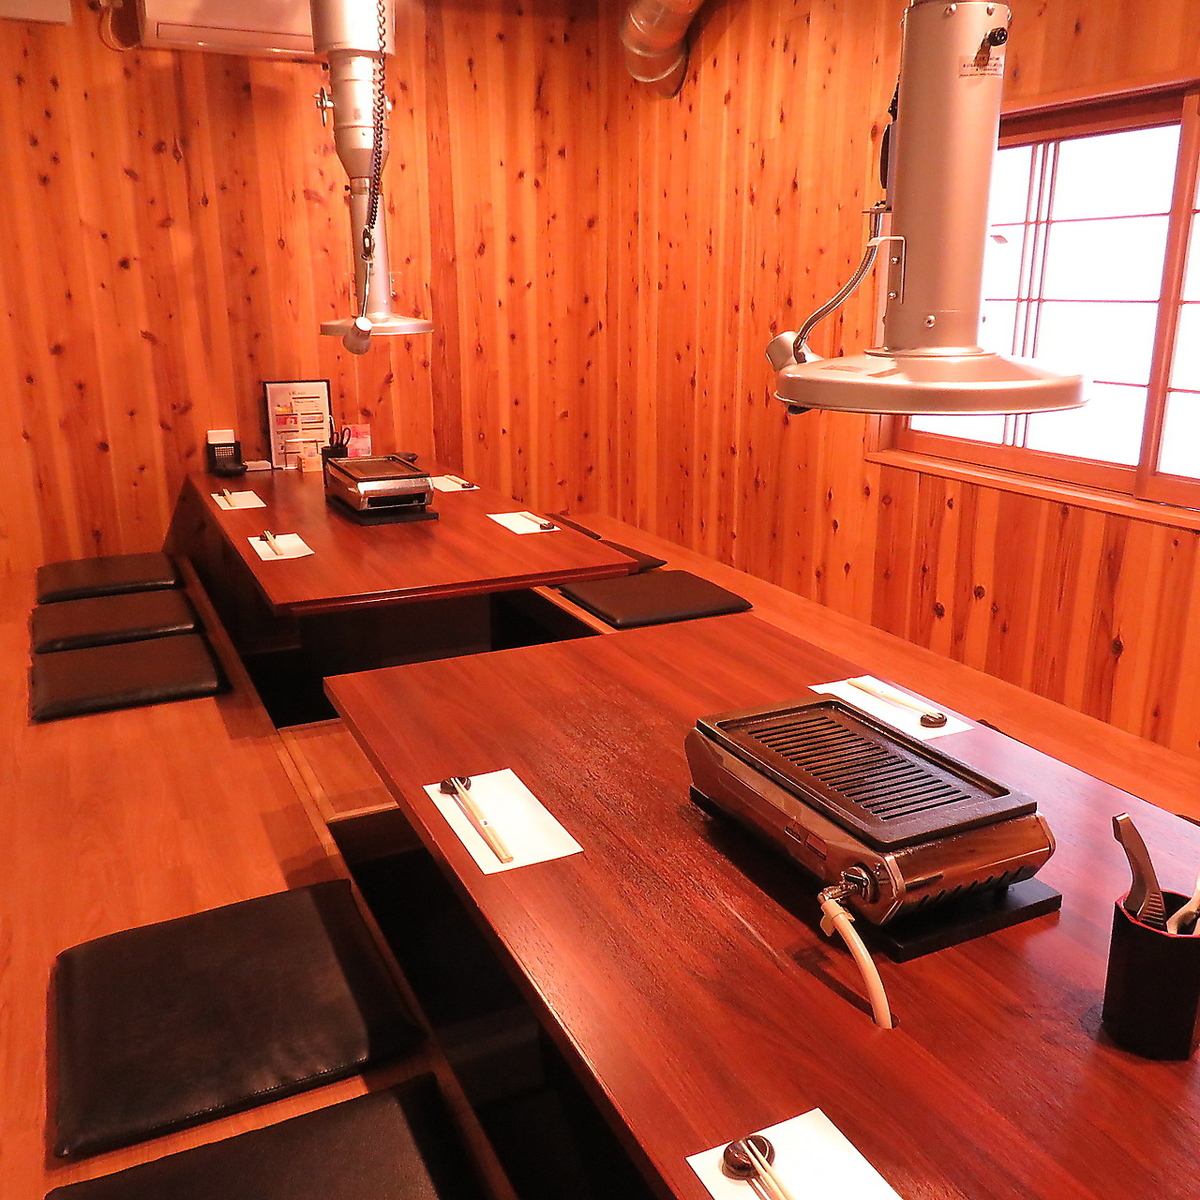 Semi-private room seats for digging up to 12 people.For drinking parties, girls-only gatherings, and dates ♪